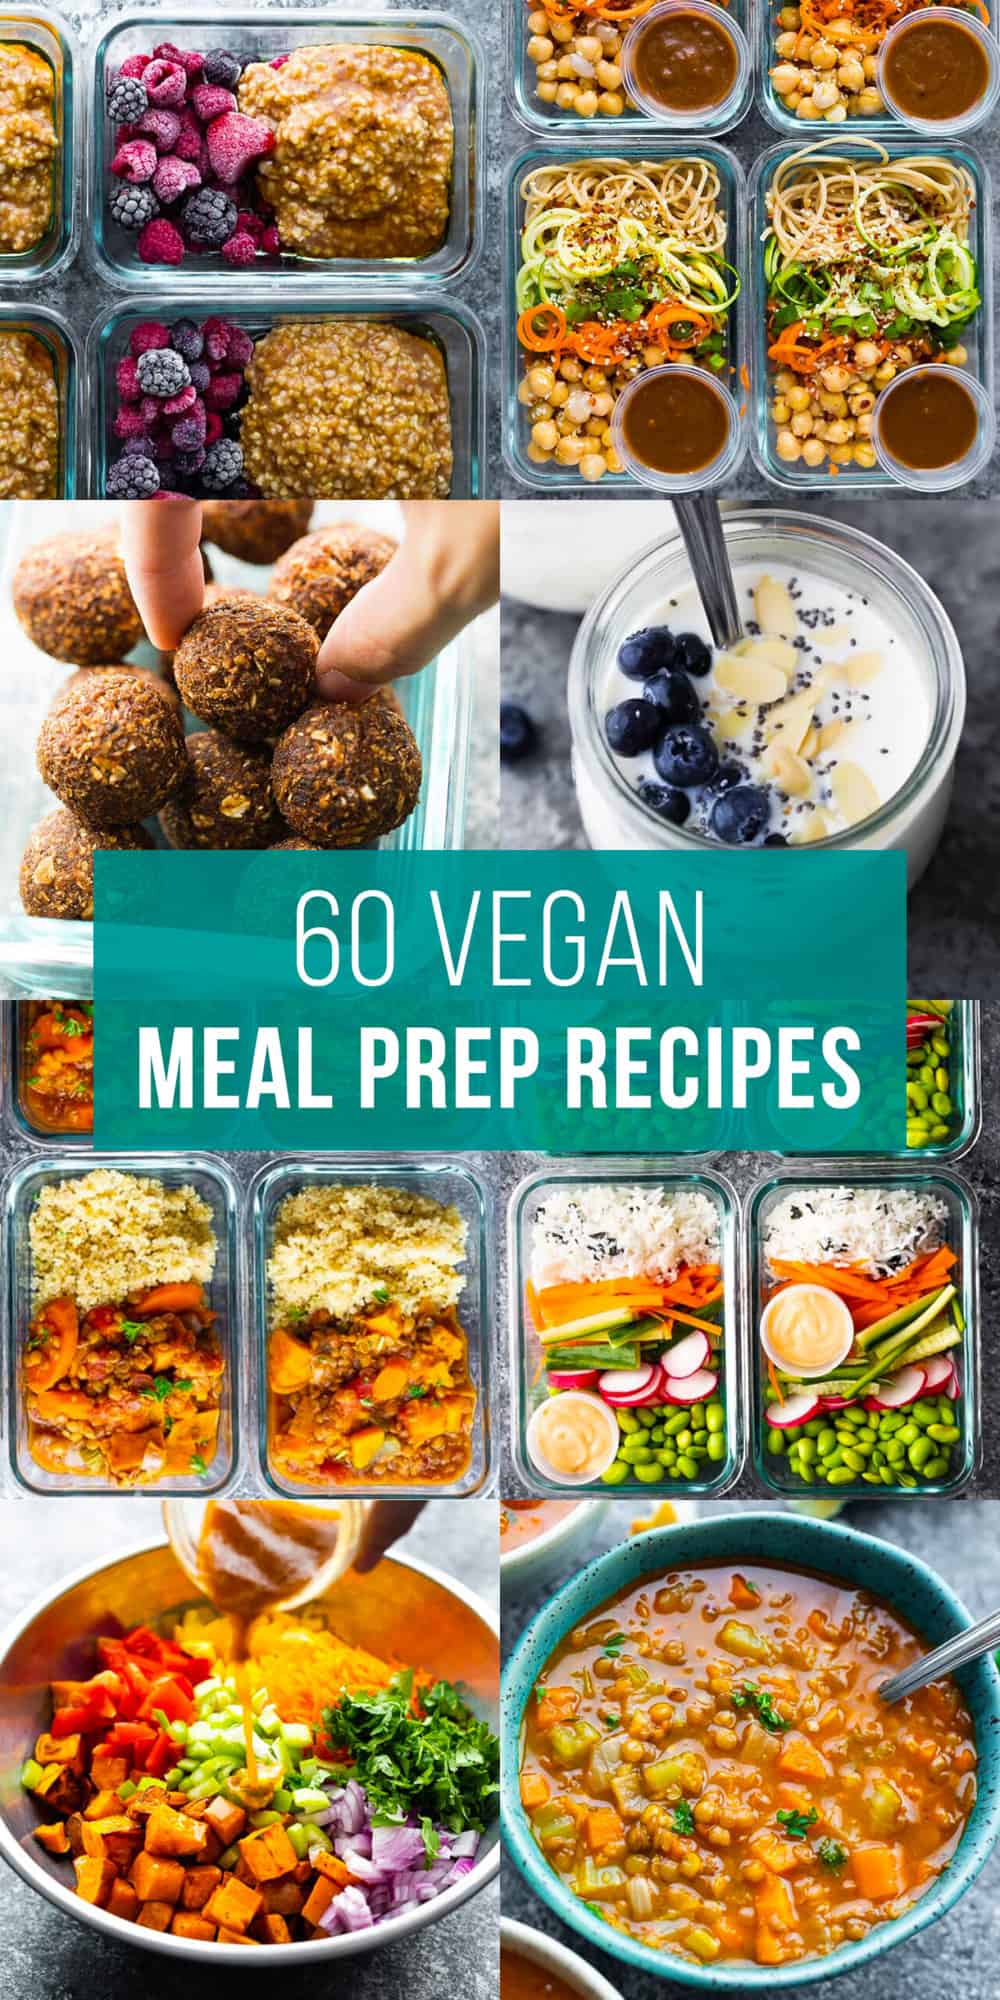 From Greens to Gains: The Perfect Vegan Meal Plan for Muscle Growth - Optimal plant-based meals and snacks before workouts